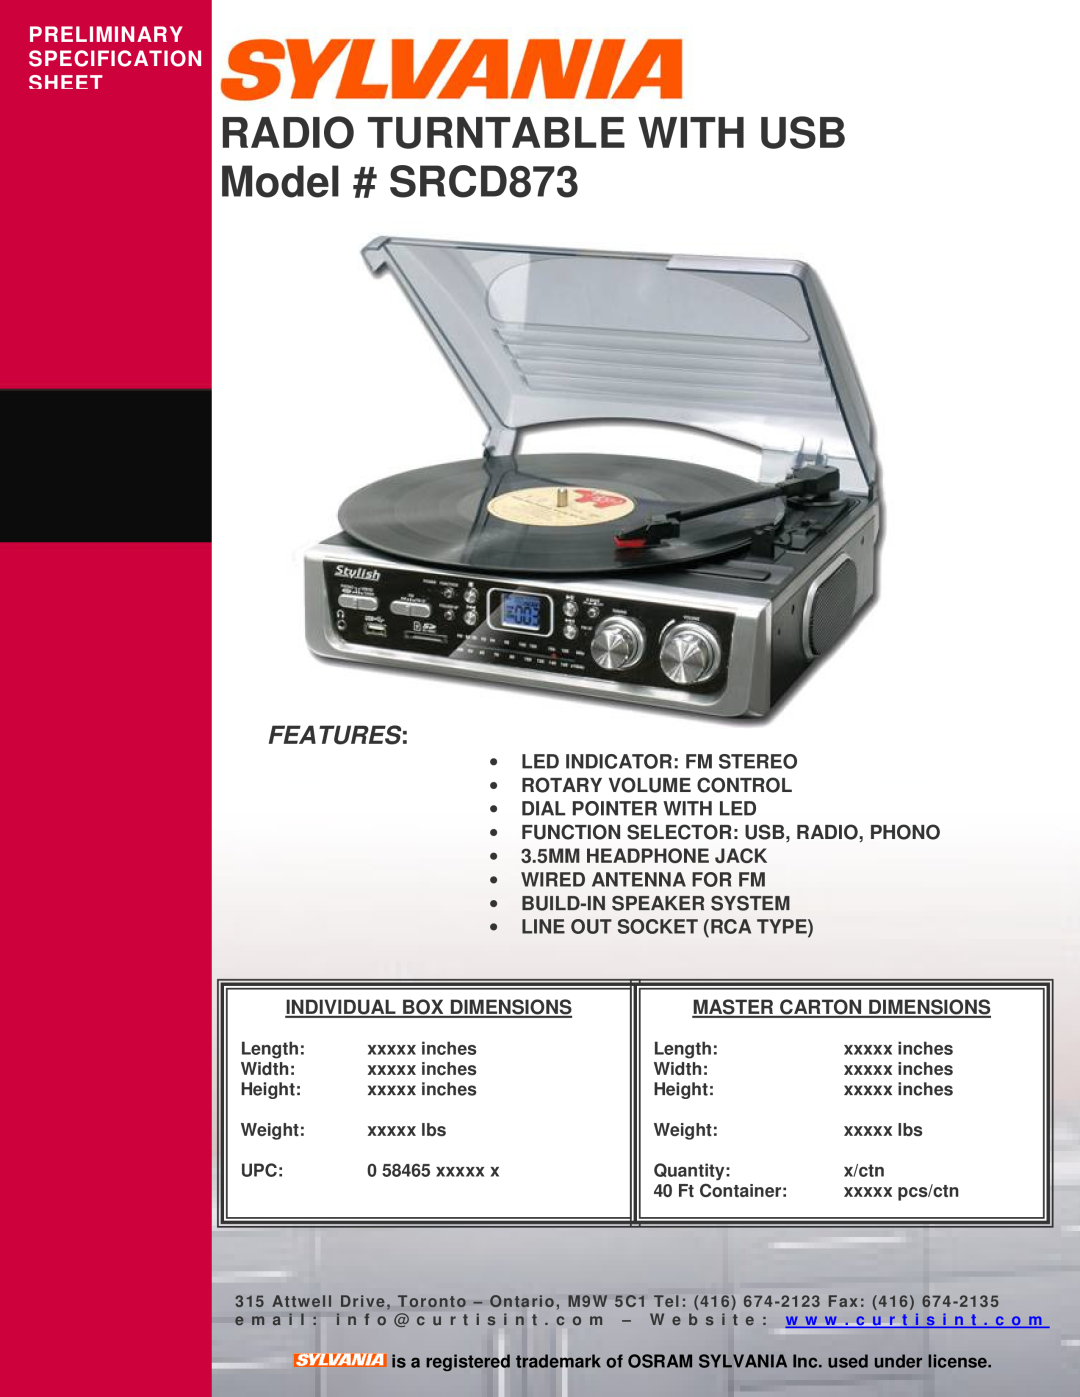 Sylvania specifications RADIO TURNTABLE WITH USB Model # SRCD873, Features, Preliminary Specification Sheet 